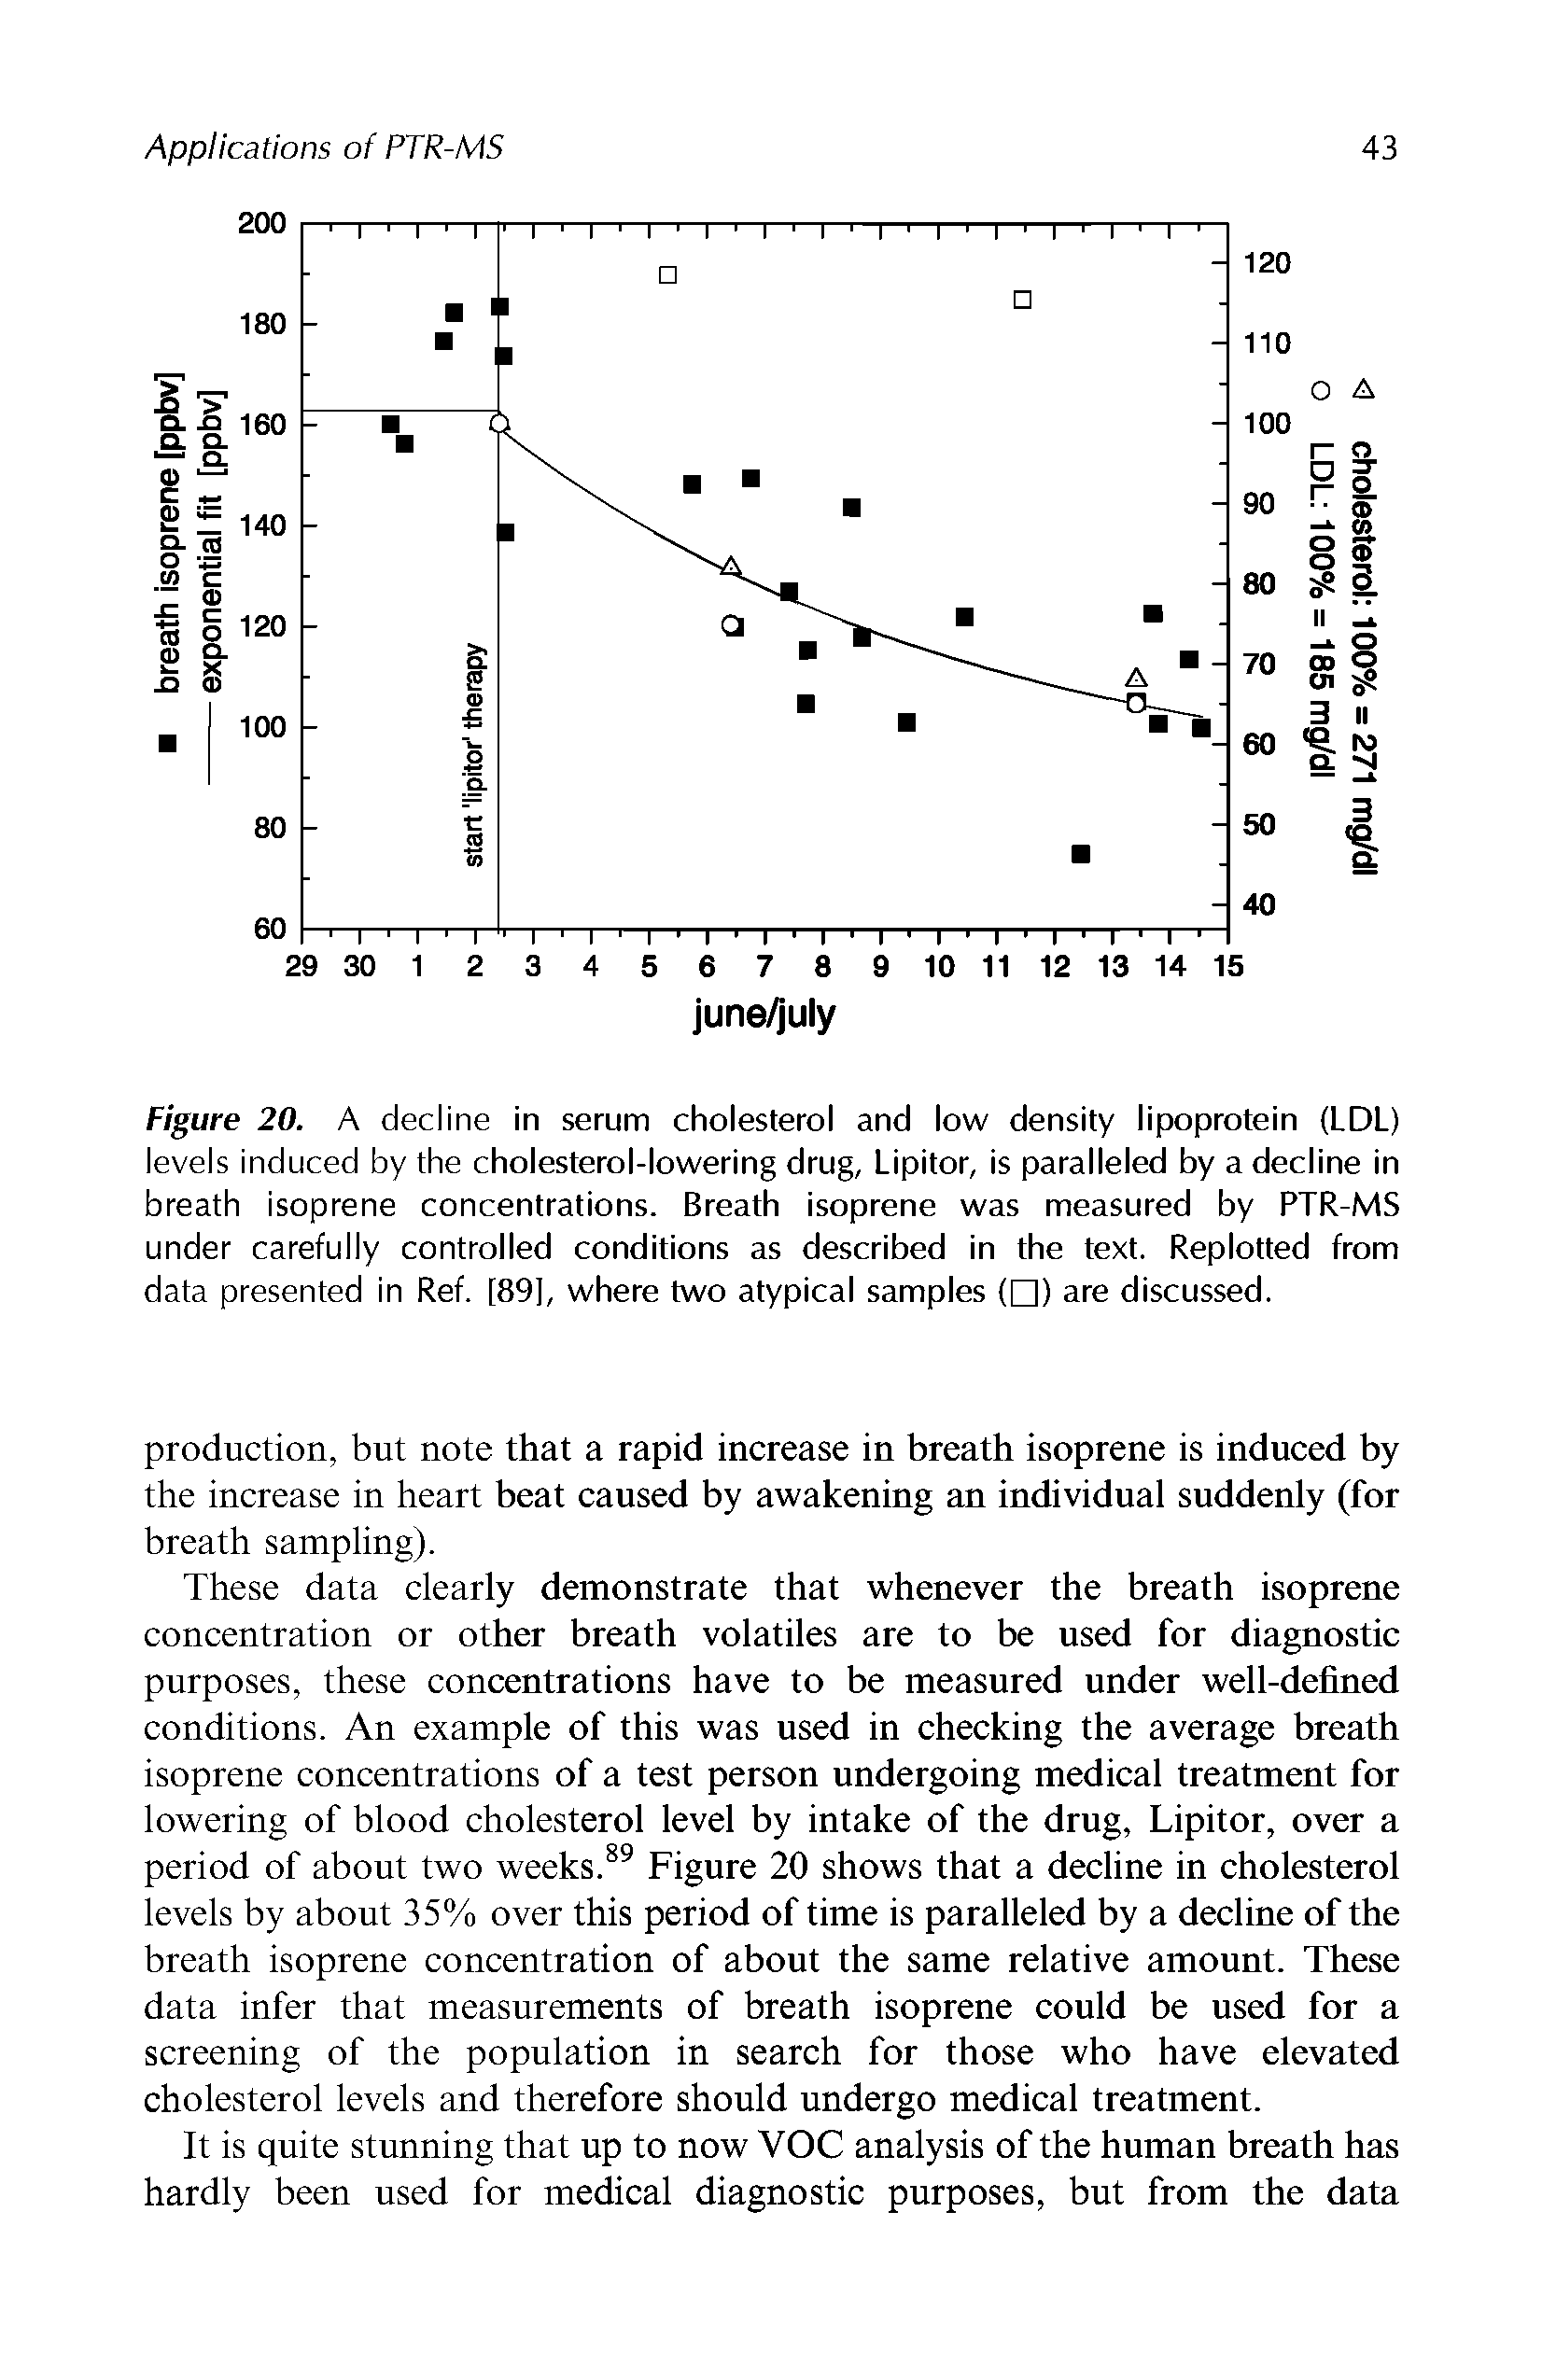 Figure 20. A decline in serum cholesterol and low density lipoprotein (LDL) levels induced by the cholesterol-lowering drug, Lipitor, is paralleled by a decline in breath isoprene concentrations. Breath isoprene was measured by PTR-MS under carefully controlled conditions as described in the text. Replotted from data presented in Ref. [89], where two atypical samples ( ) are discussed.